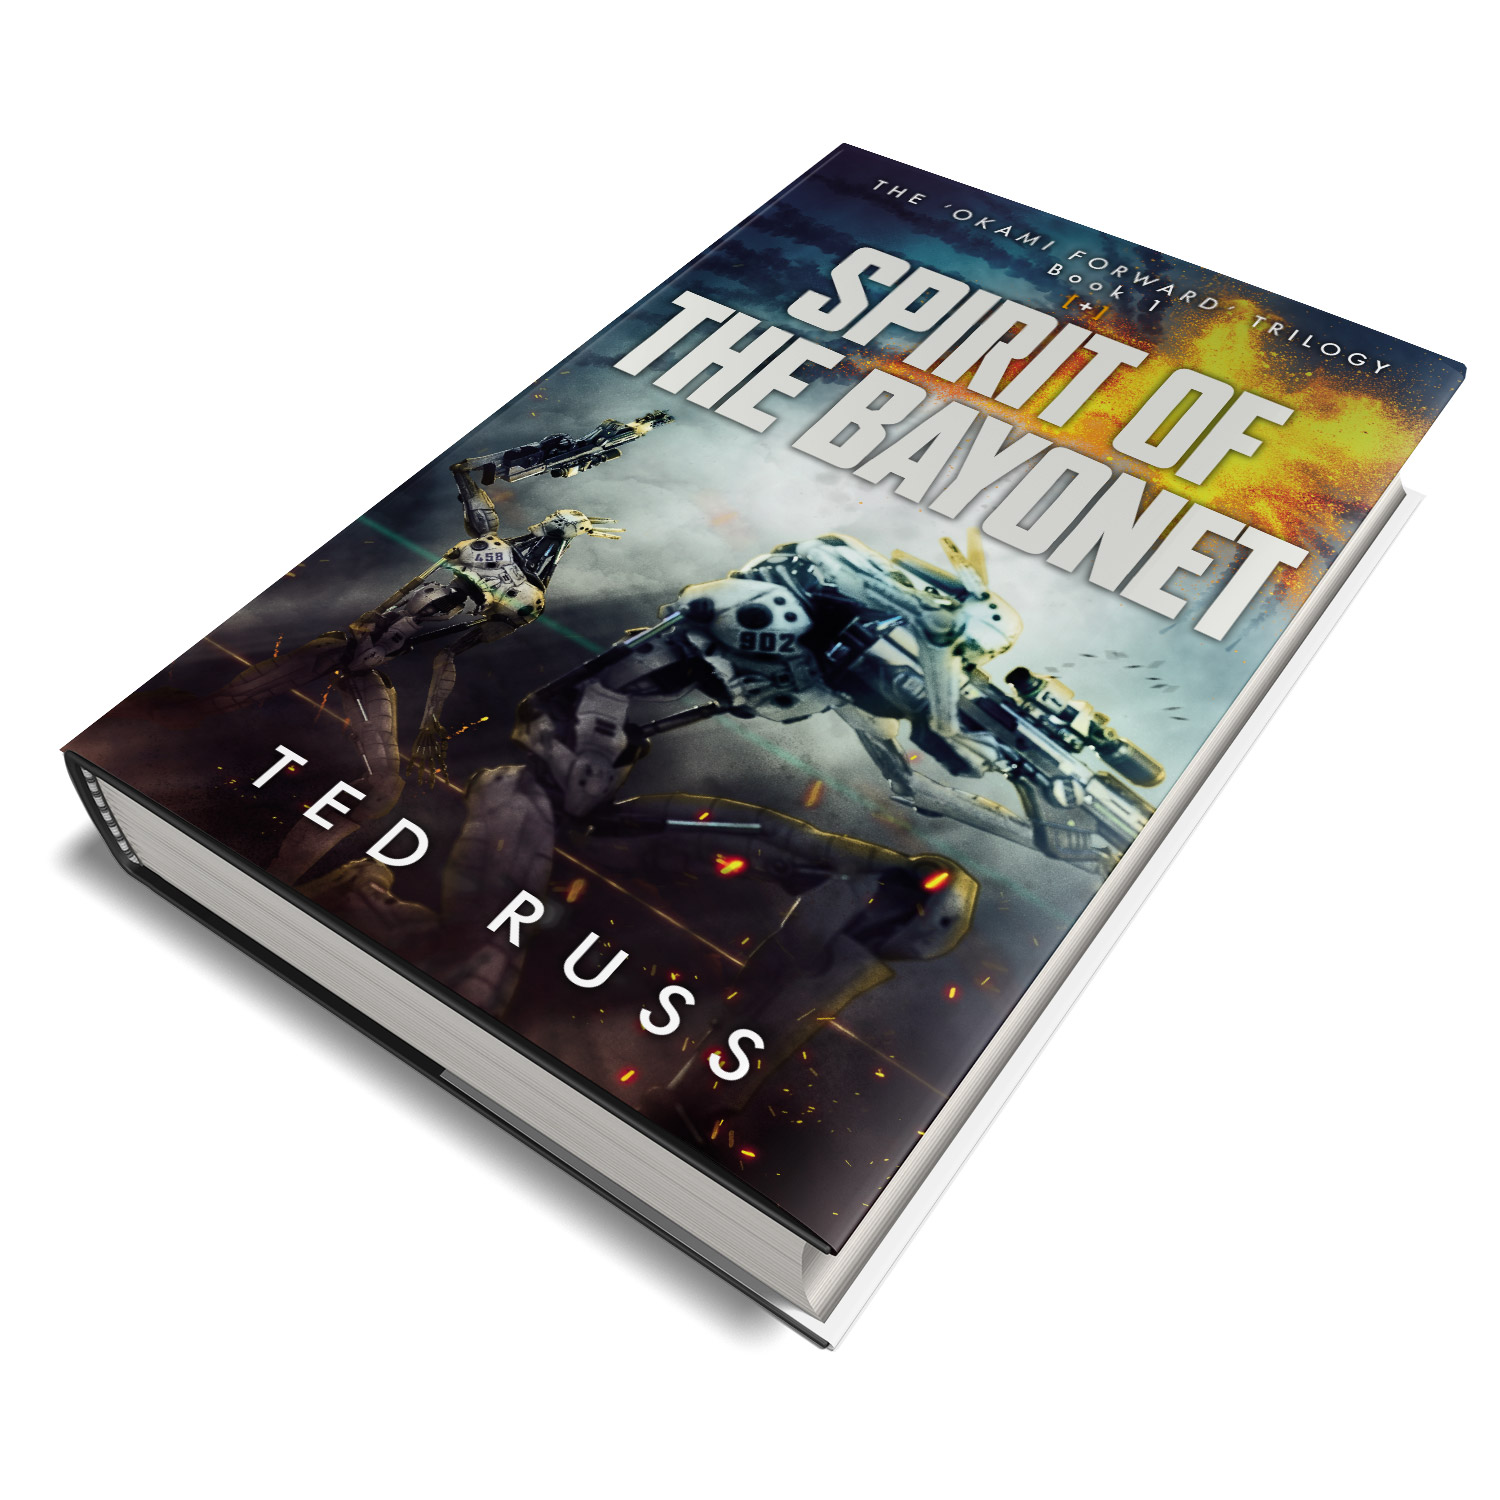 The 'Okami Forward' Trilogy is a spectacular scifi series by author Ted Russ. The cover design and interior manuscript formatting are by Mark Thomas. Learn what Mark could do for your book by visiting coverness.com.